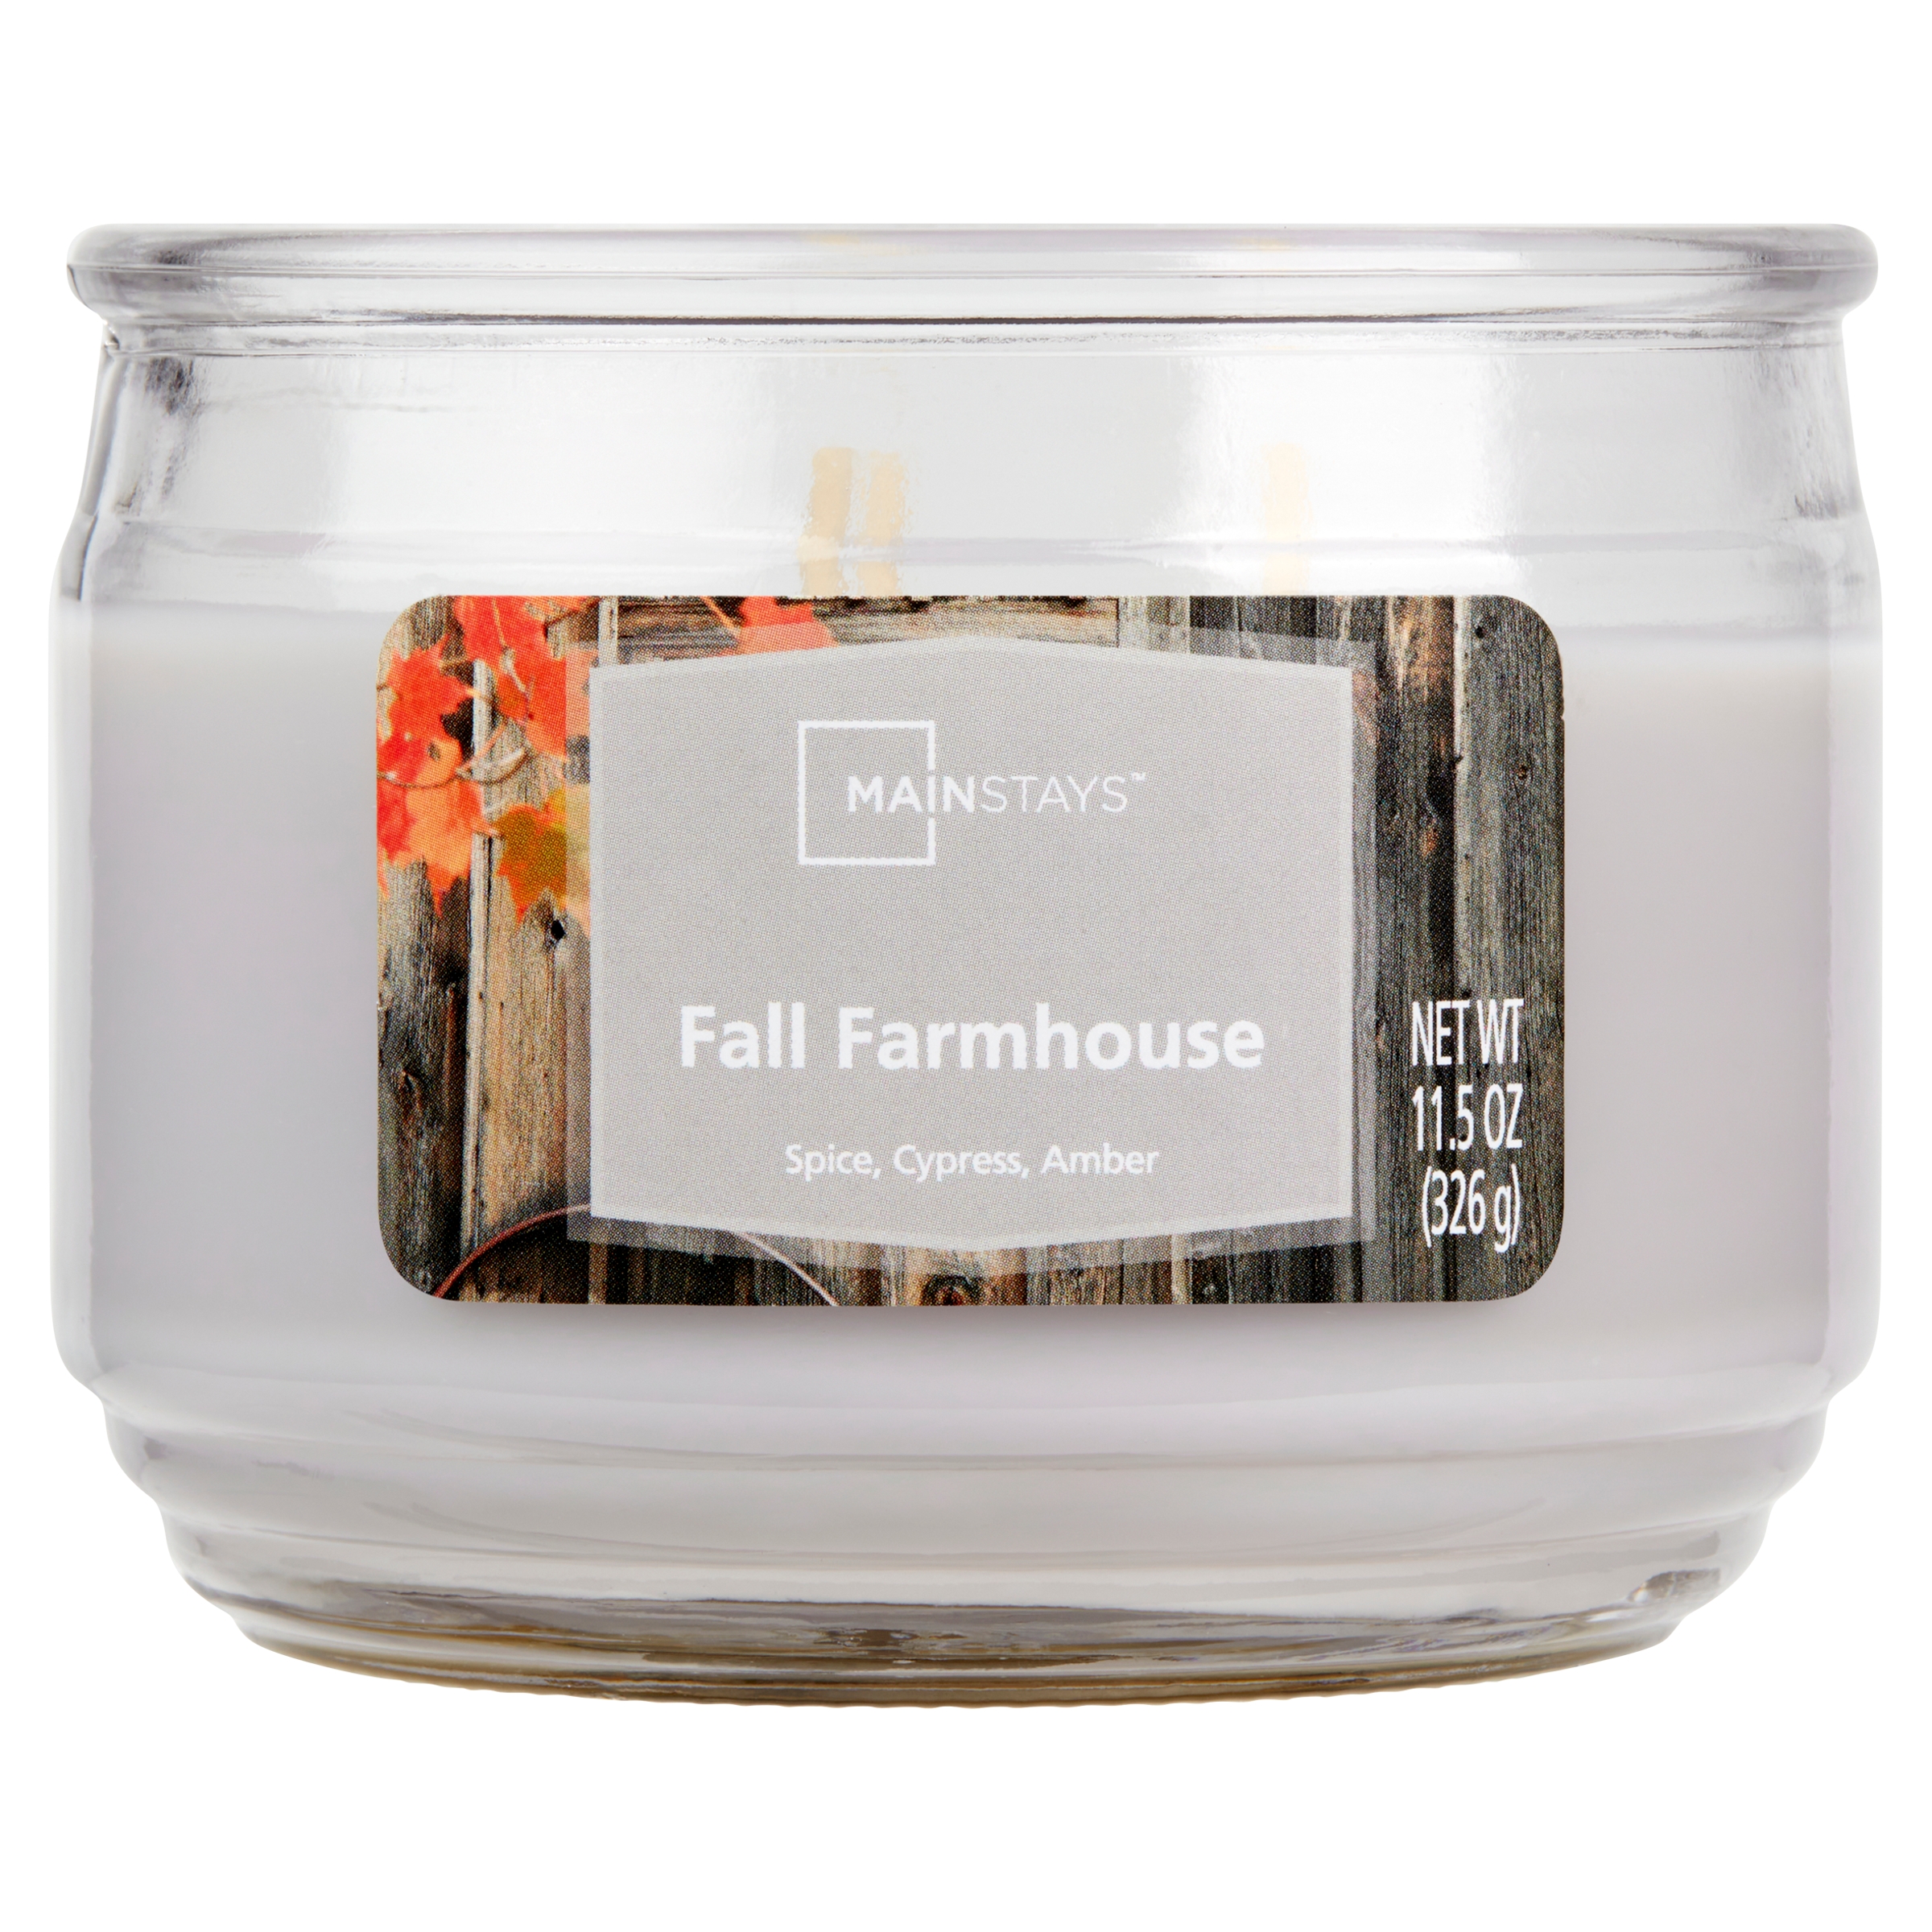 Mainstays Fall Farmhouse Scented 3-Wick Glass Jar Candle, 11.5 oz - image 1 of 7